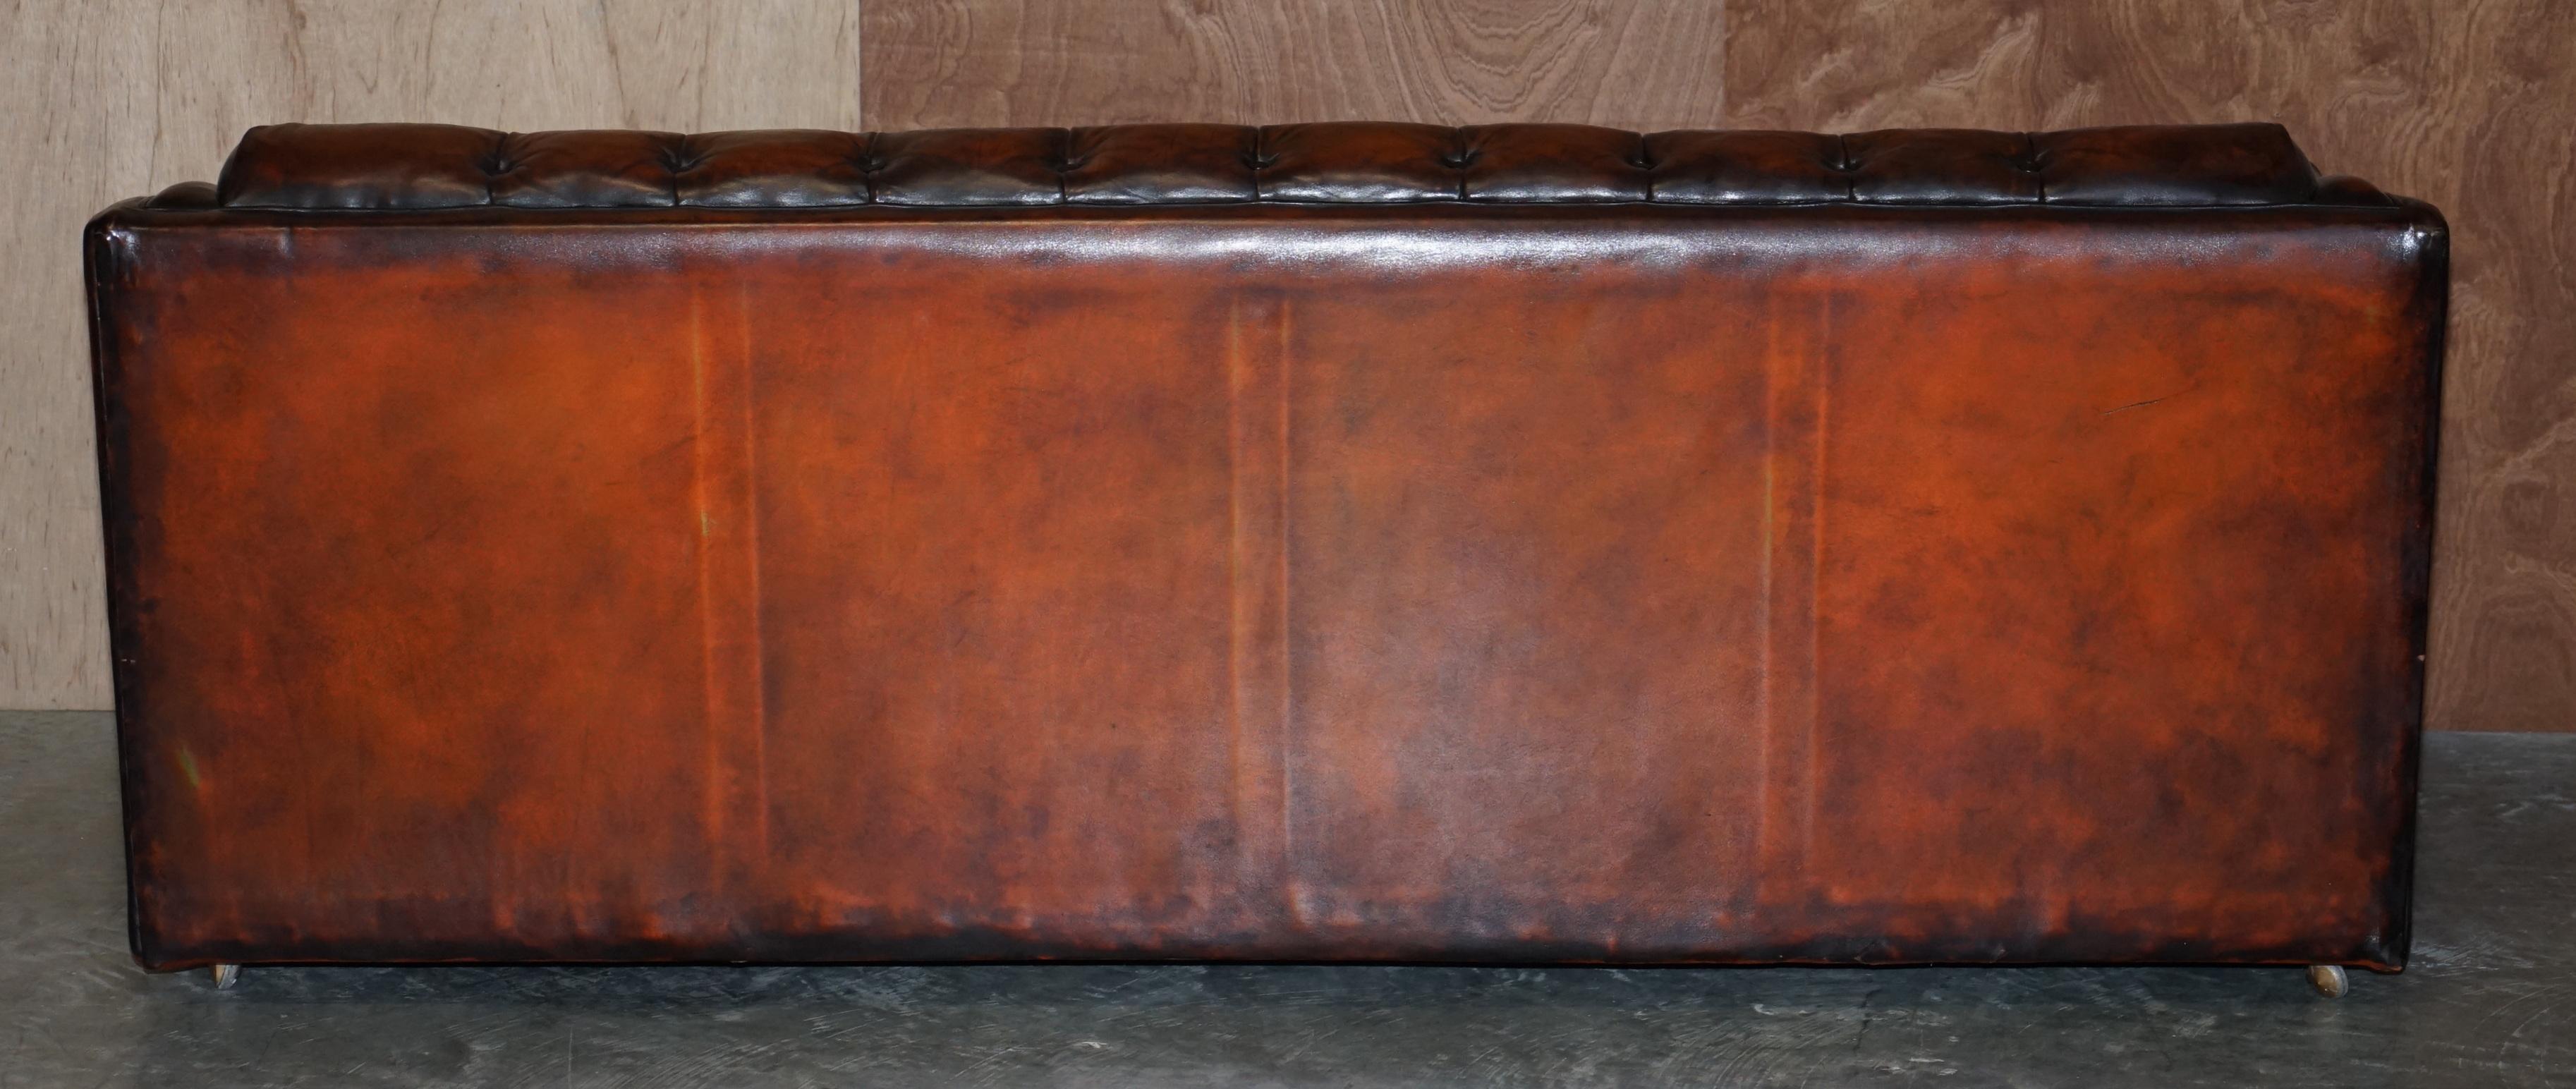 Circa 1920's Art Deco Fully Restored Chesterfield Brown Leather Sofa Part Suite For Sale 4